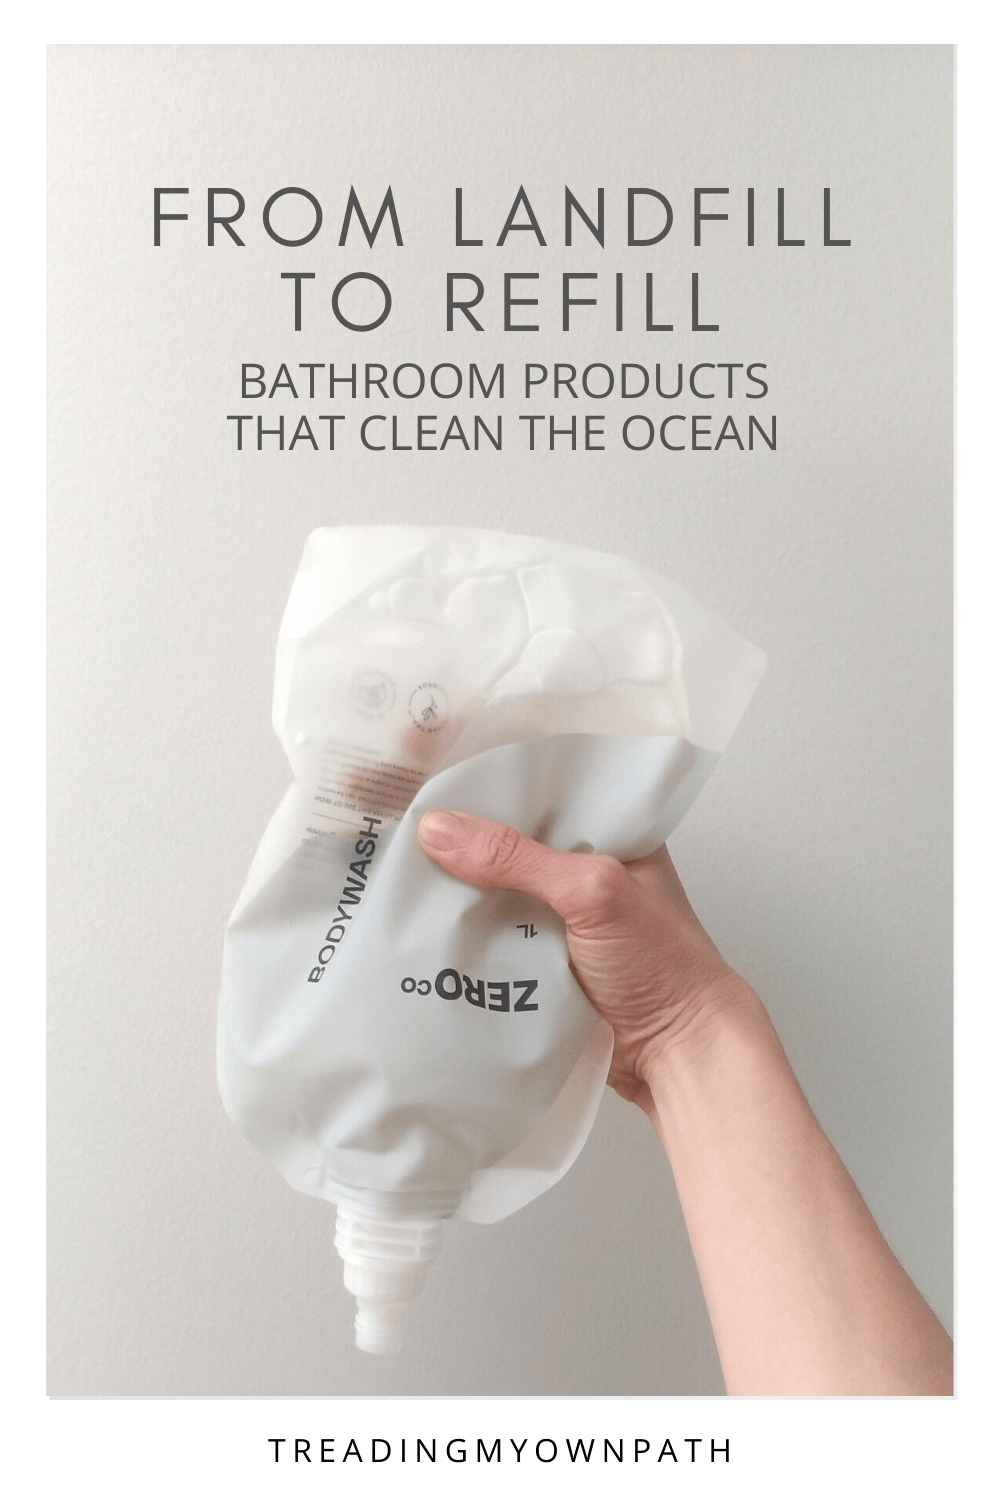 From landfill to refill: cleaning products that clean the ocean